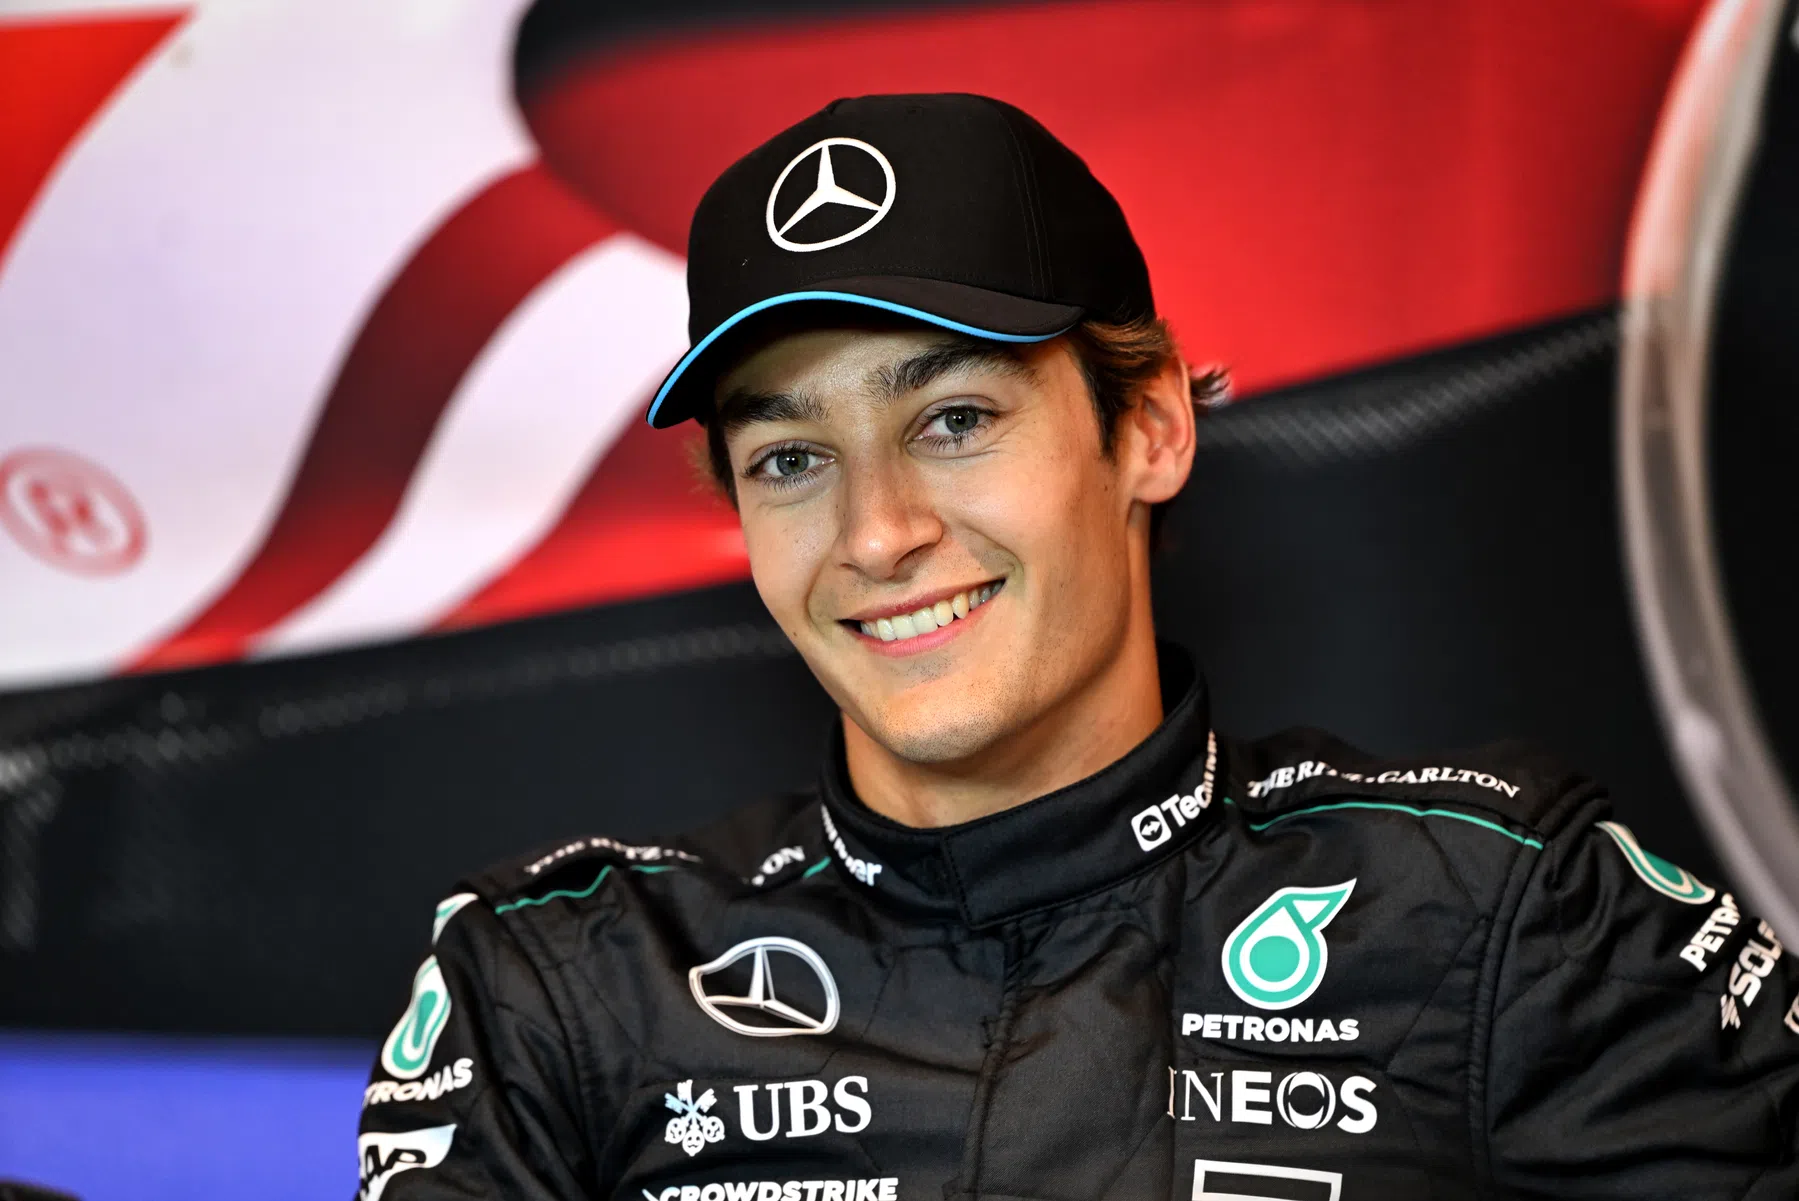 Russell is confident and comfortable ahead of Canadian Grand Prix 